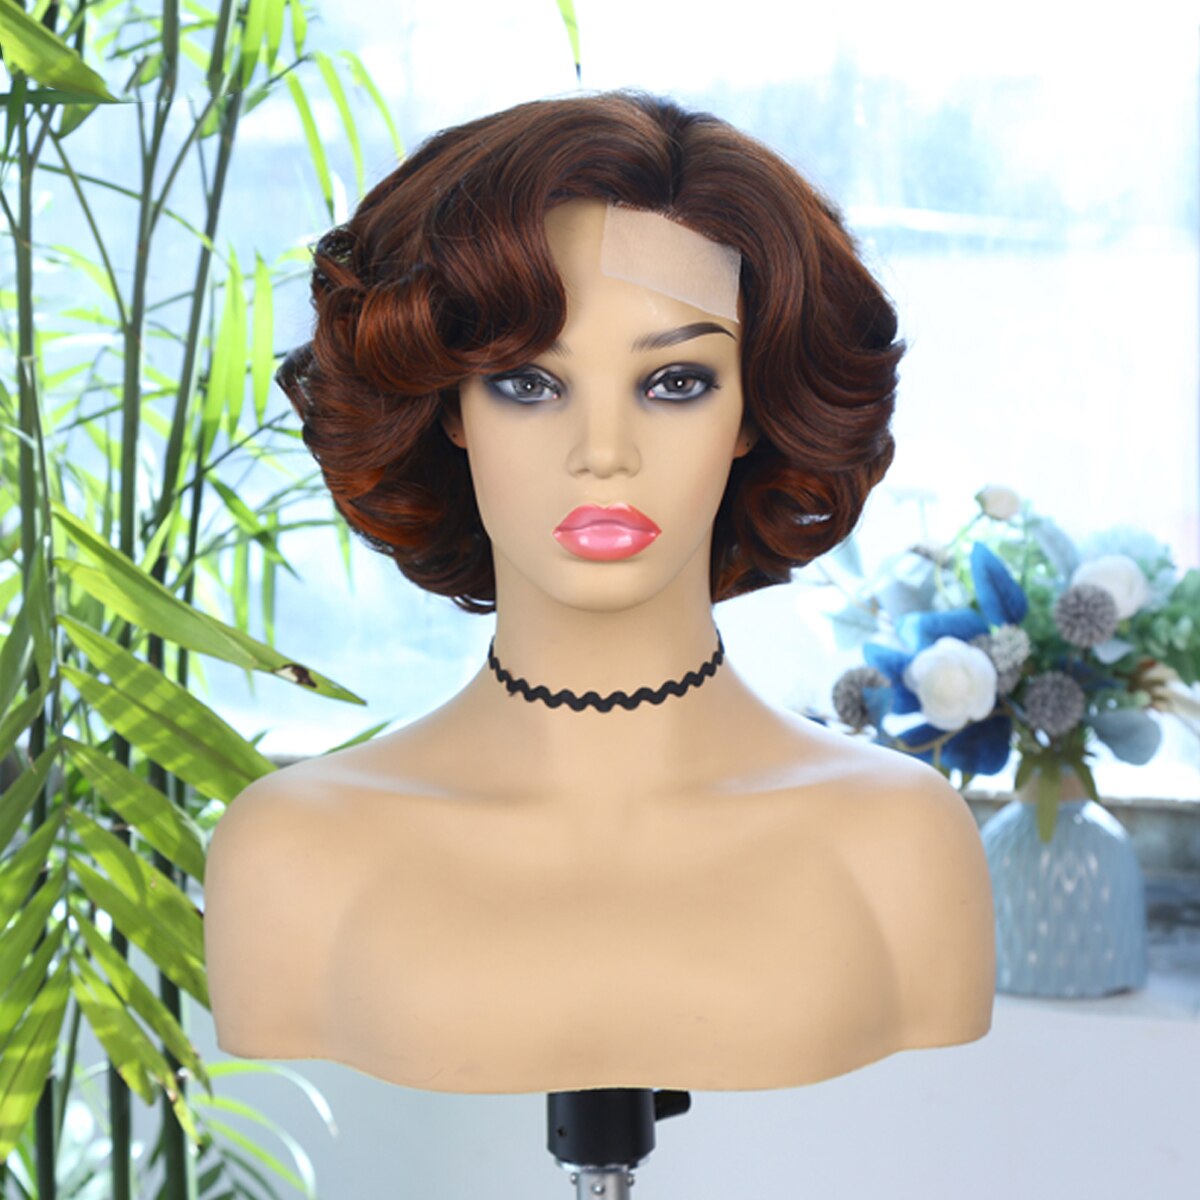 Body Wave Short Wig Brown Color Synthetic Hair Wigs For Women Side Part Wigs On Sale Clearance Cosplay Wig Daily Use